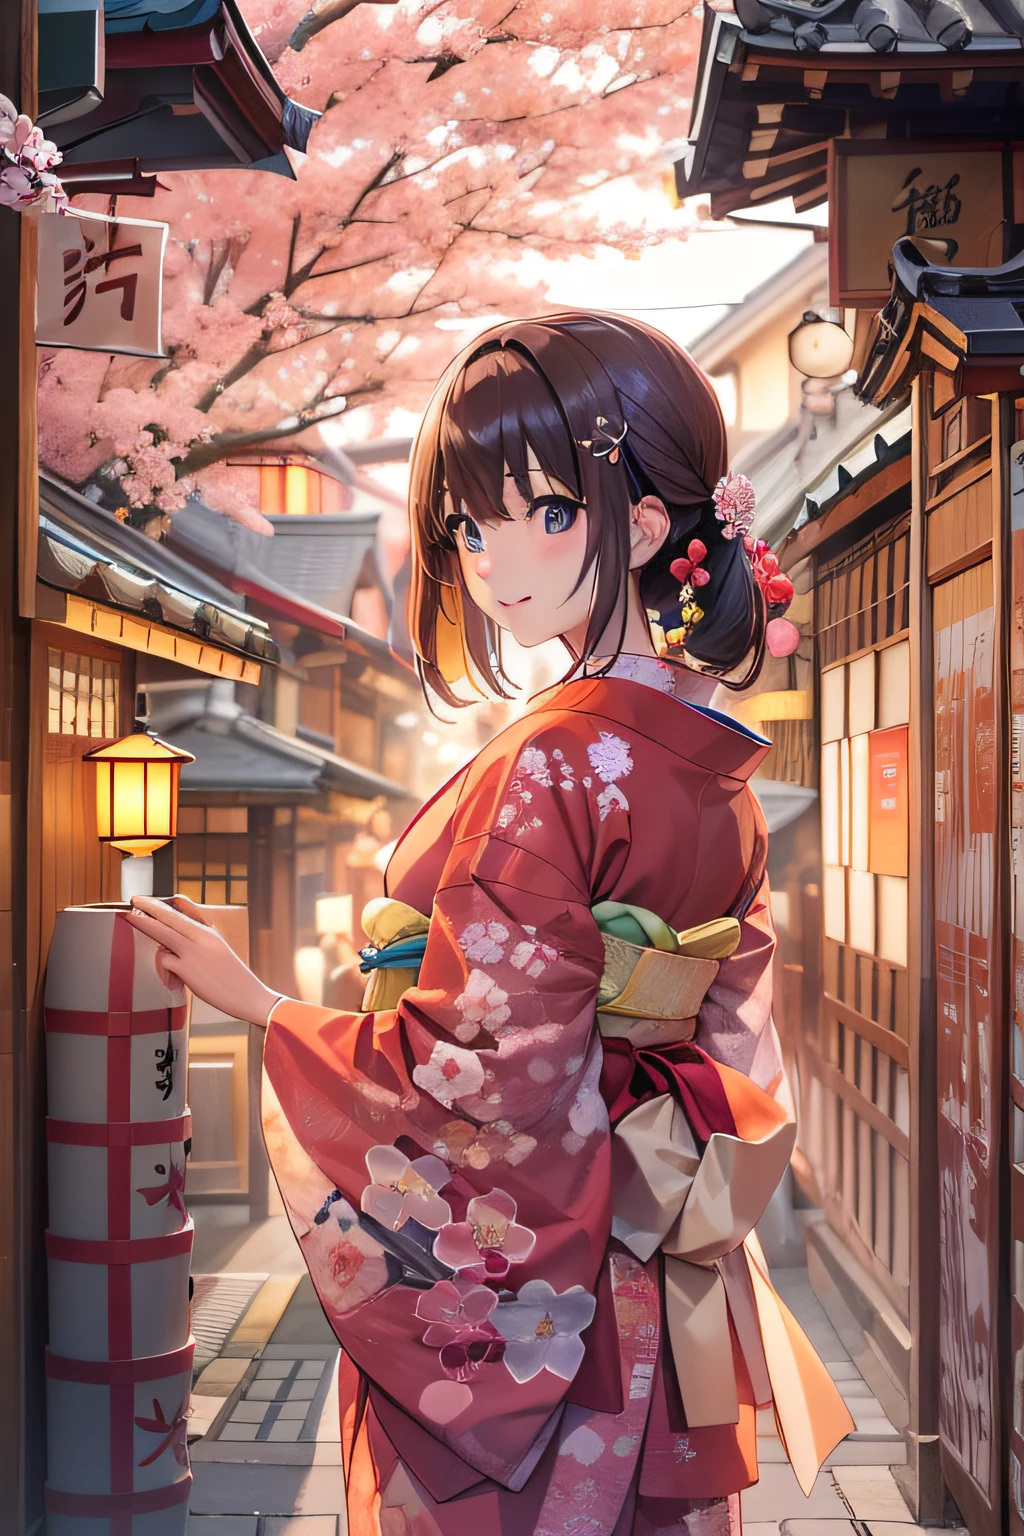 hightquality、japanese beautiful woman、Wearing a cherry blossom kimono、early evening、Japan houses、Getting out the window、Watching fireworks、Streets of Kyoto、Side drinks